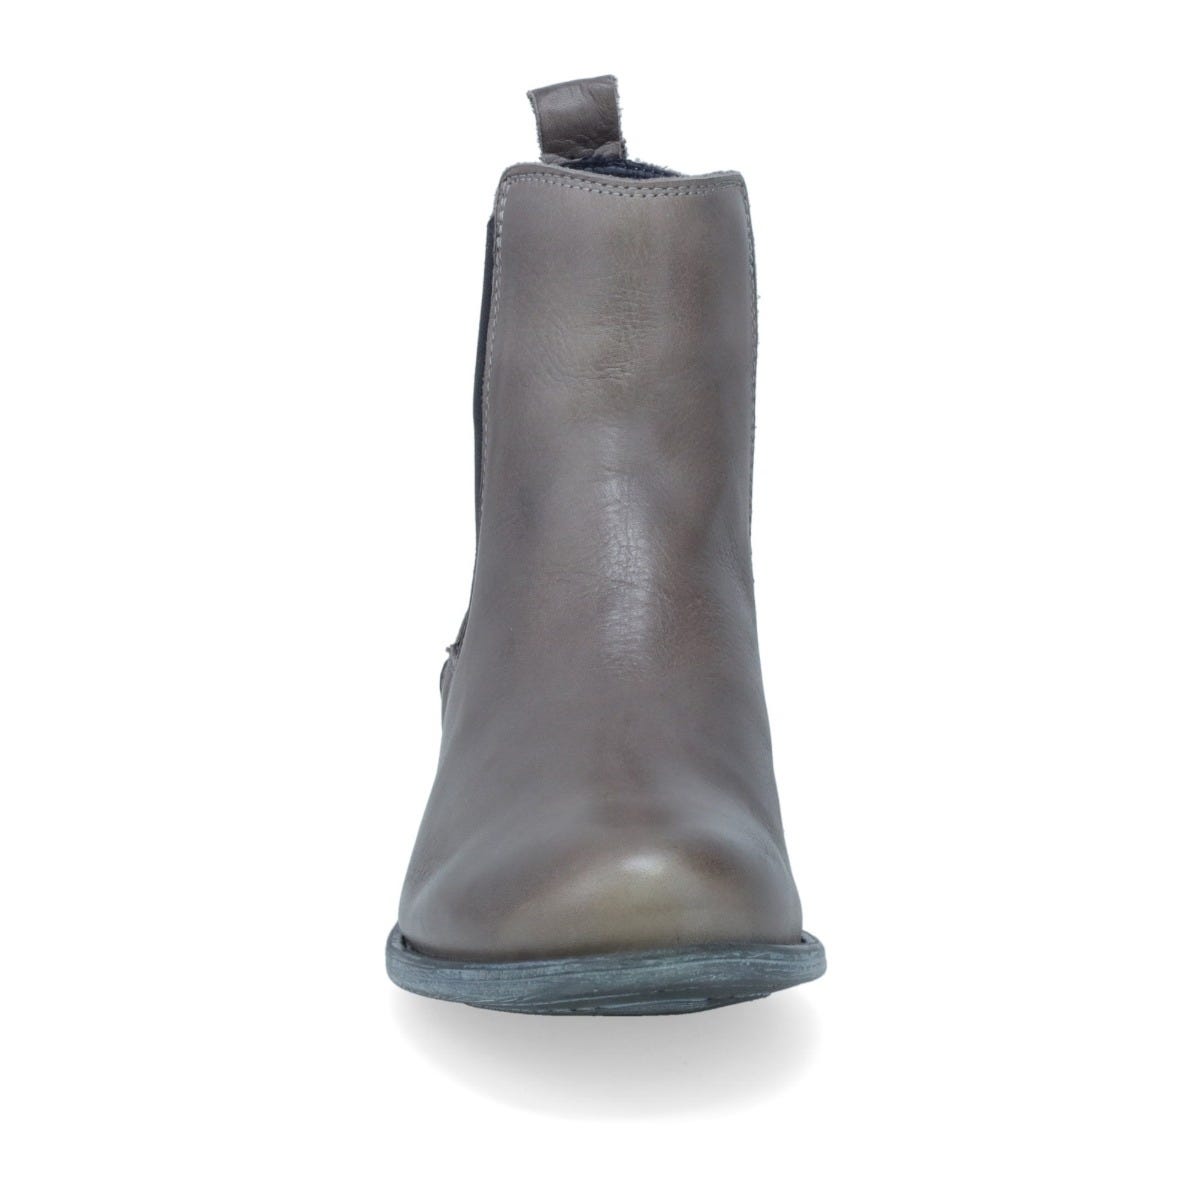 Front view of the miz mooz lewis bootie in the color graphite/grey. This flat bootie has black elastic gores on the side and a pull tab on the back.